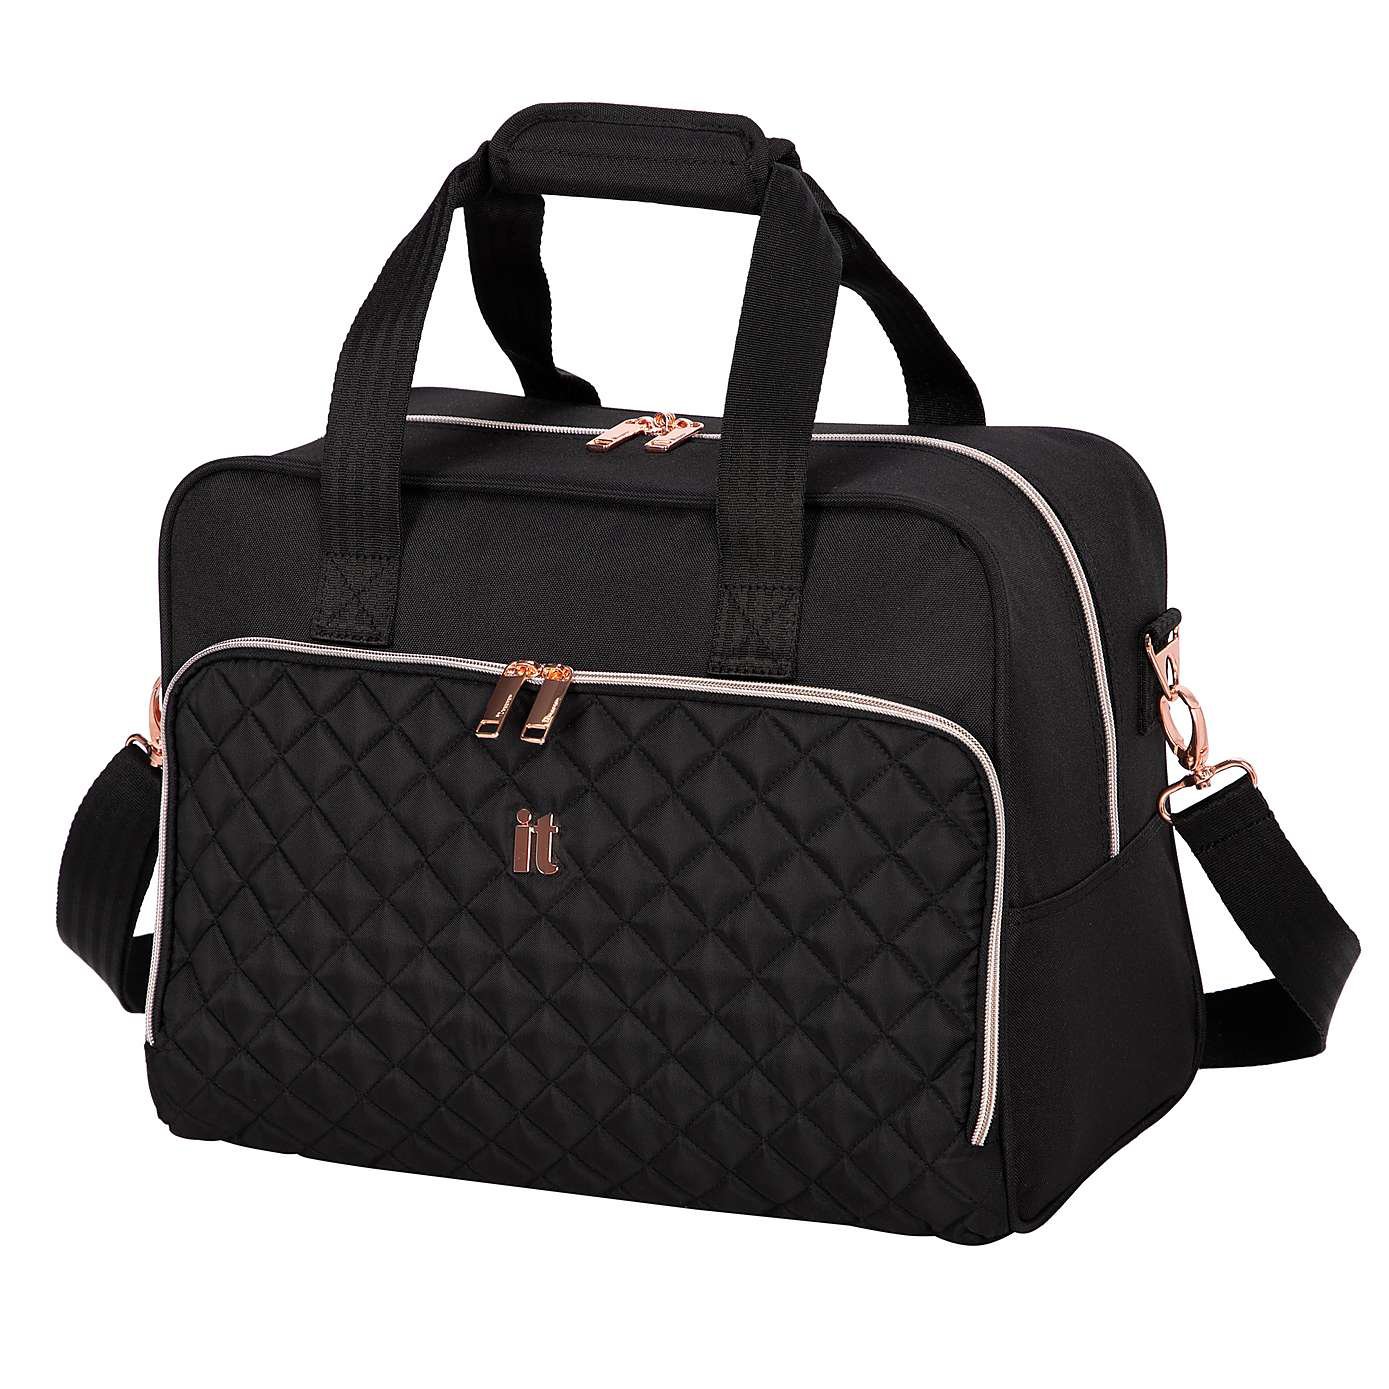 it Luggage Quilted Divinity Holdall Black Rosegold Reviews - Updated ...